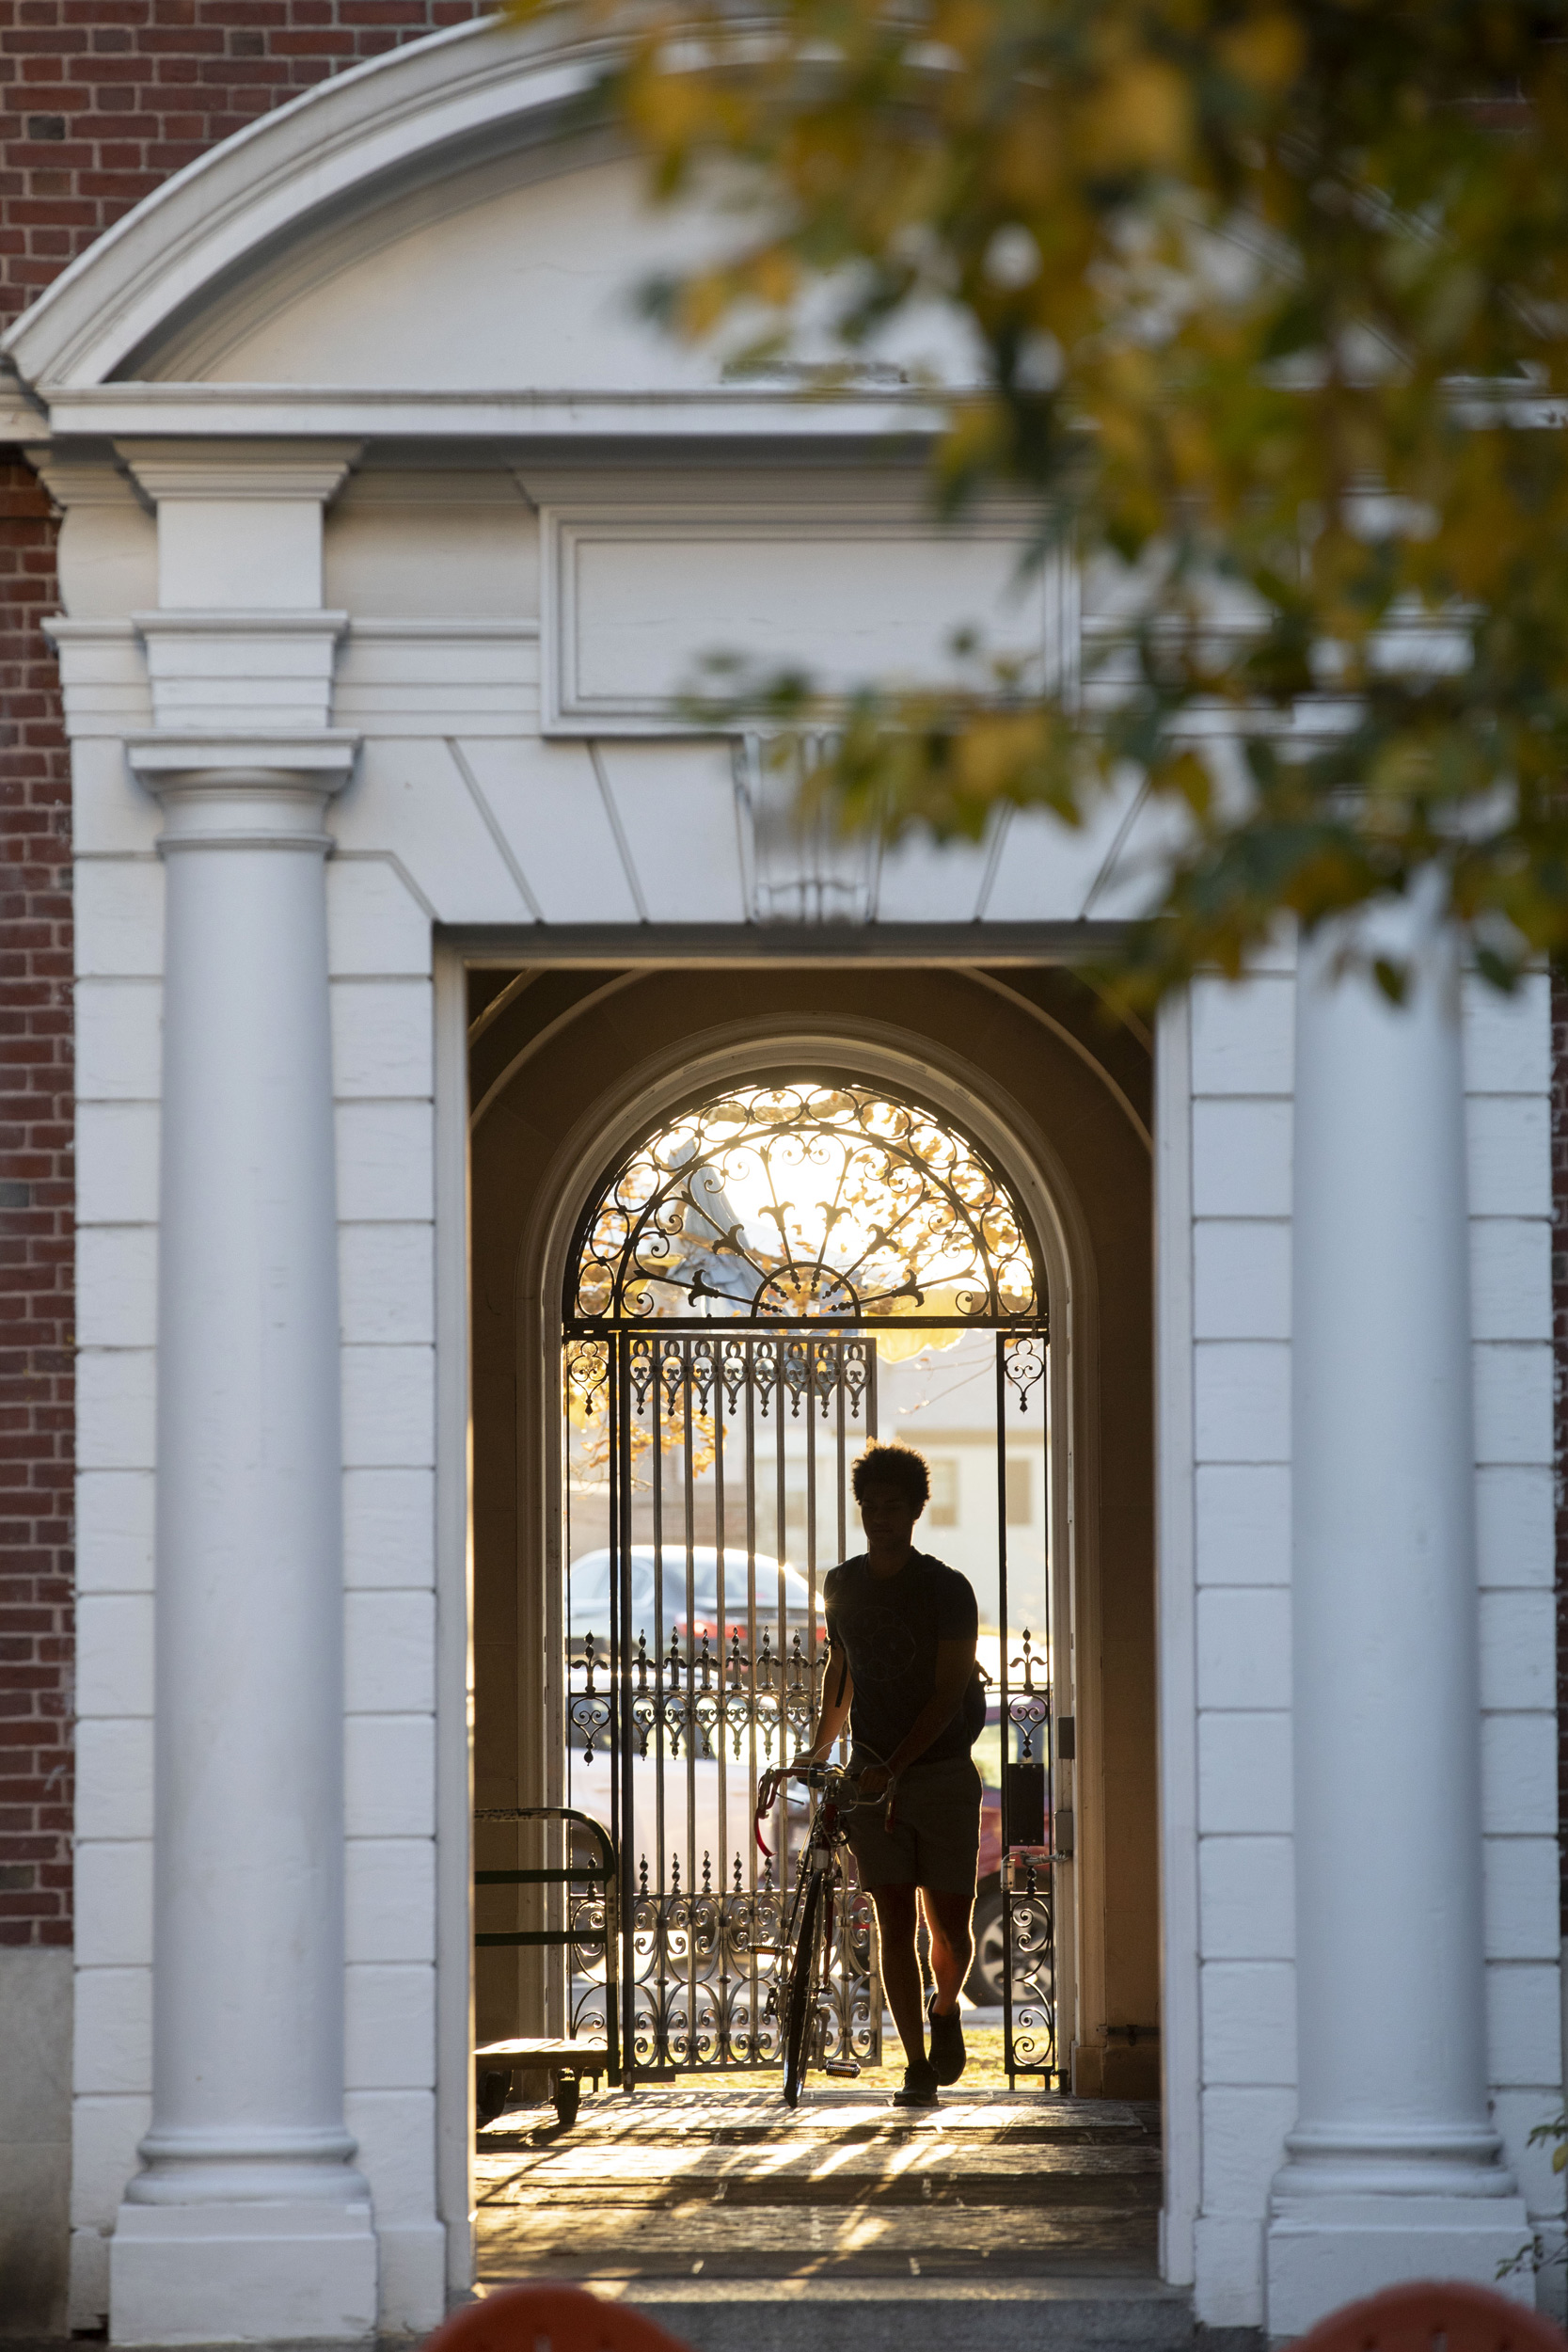 A bicyclist enters the Eliot House courtyard.